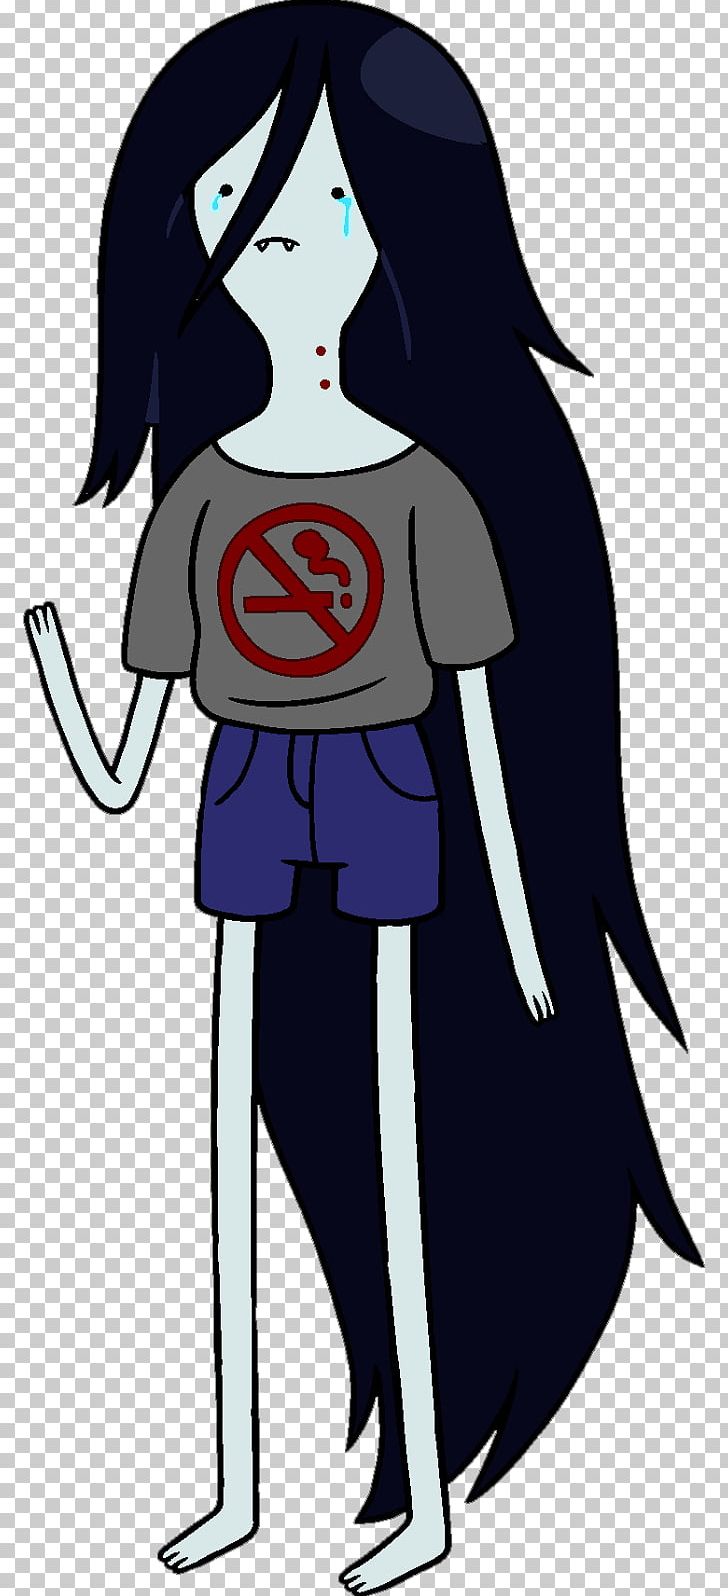 Marceline The Vampire Queen Ice King Finn The Human Princess Bubblegum Flame Princess PNG, Clipart,  Free PNG Download